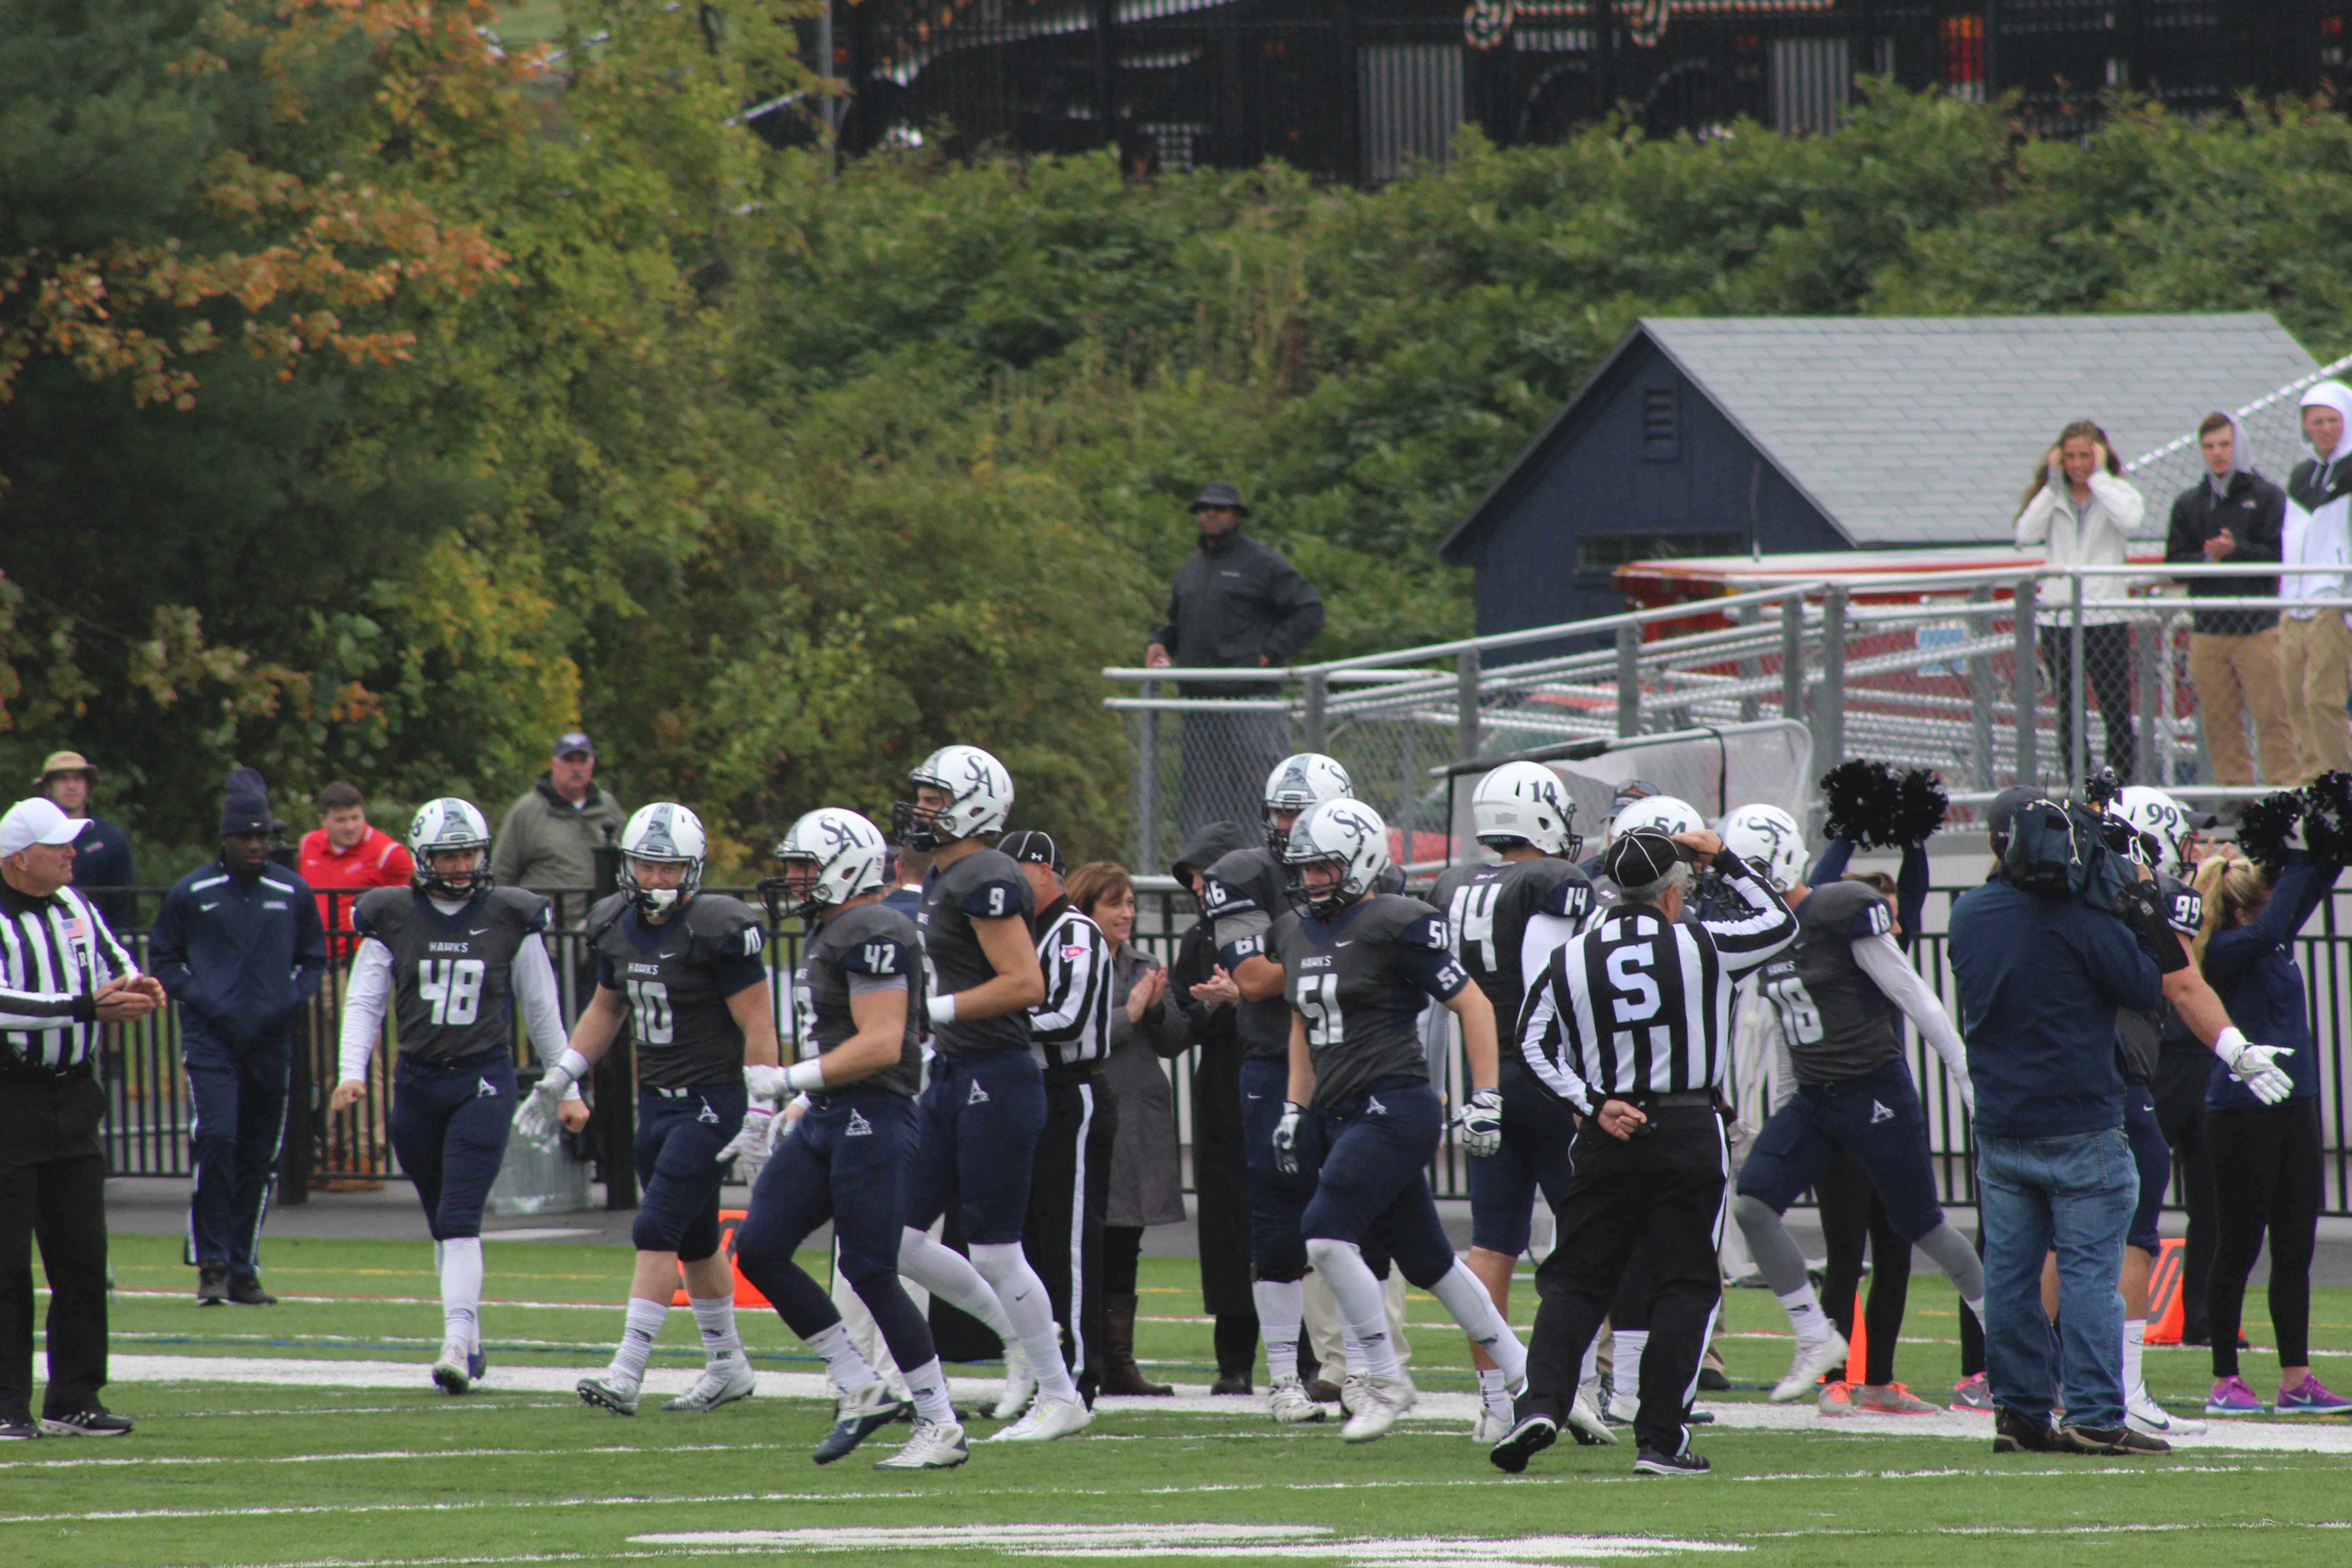 The special teams unit coming onto the field at Grappone Stadium Oct. 1.